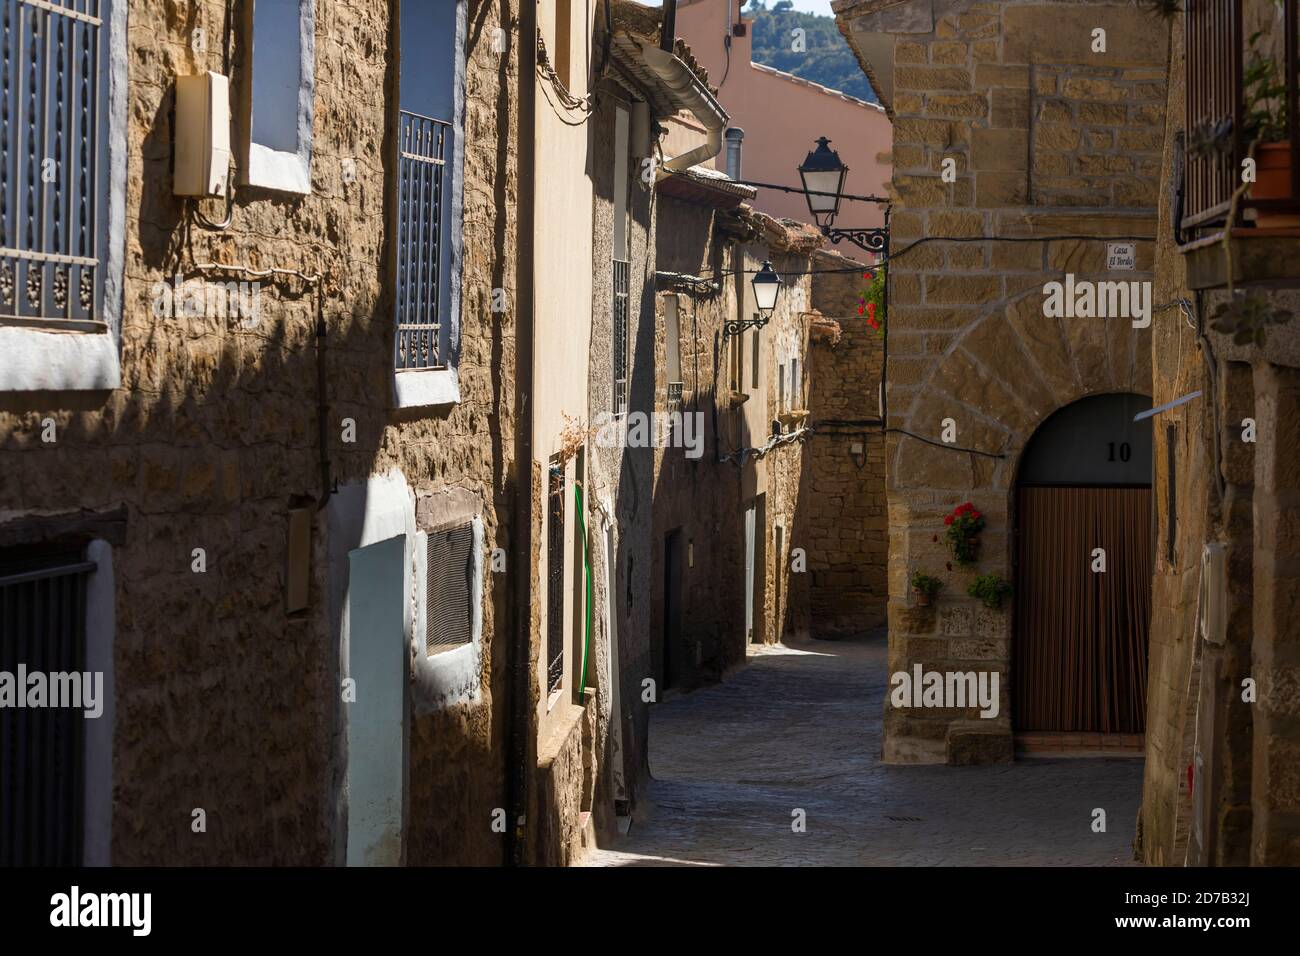 Picturesque streets with medieval buildings, in the small town of Ores, in the Cinco Villas region, Aragon, Spain. Stock Photo